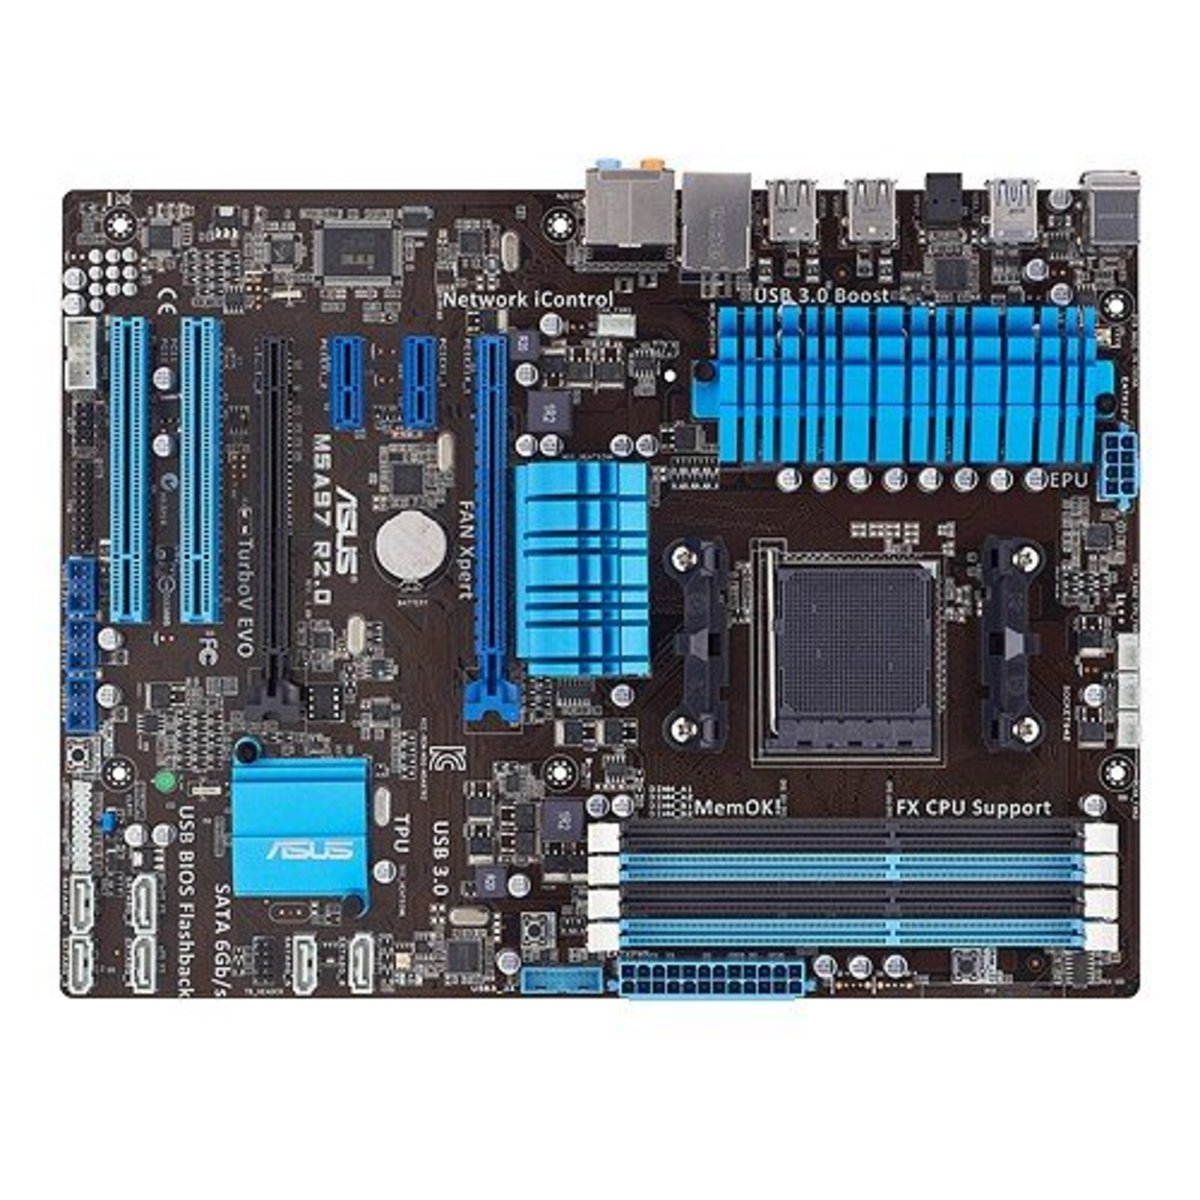 A solid alternative to the Gigabyte board above is the Asus M5A97 which features Asus' Energy Processing Unit and TurboV processing unit. It's also a solid option if you're building a Home Theater Gaming PC with PC Remote GO!